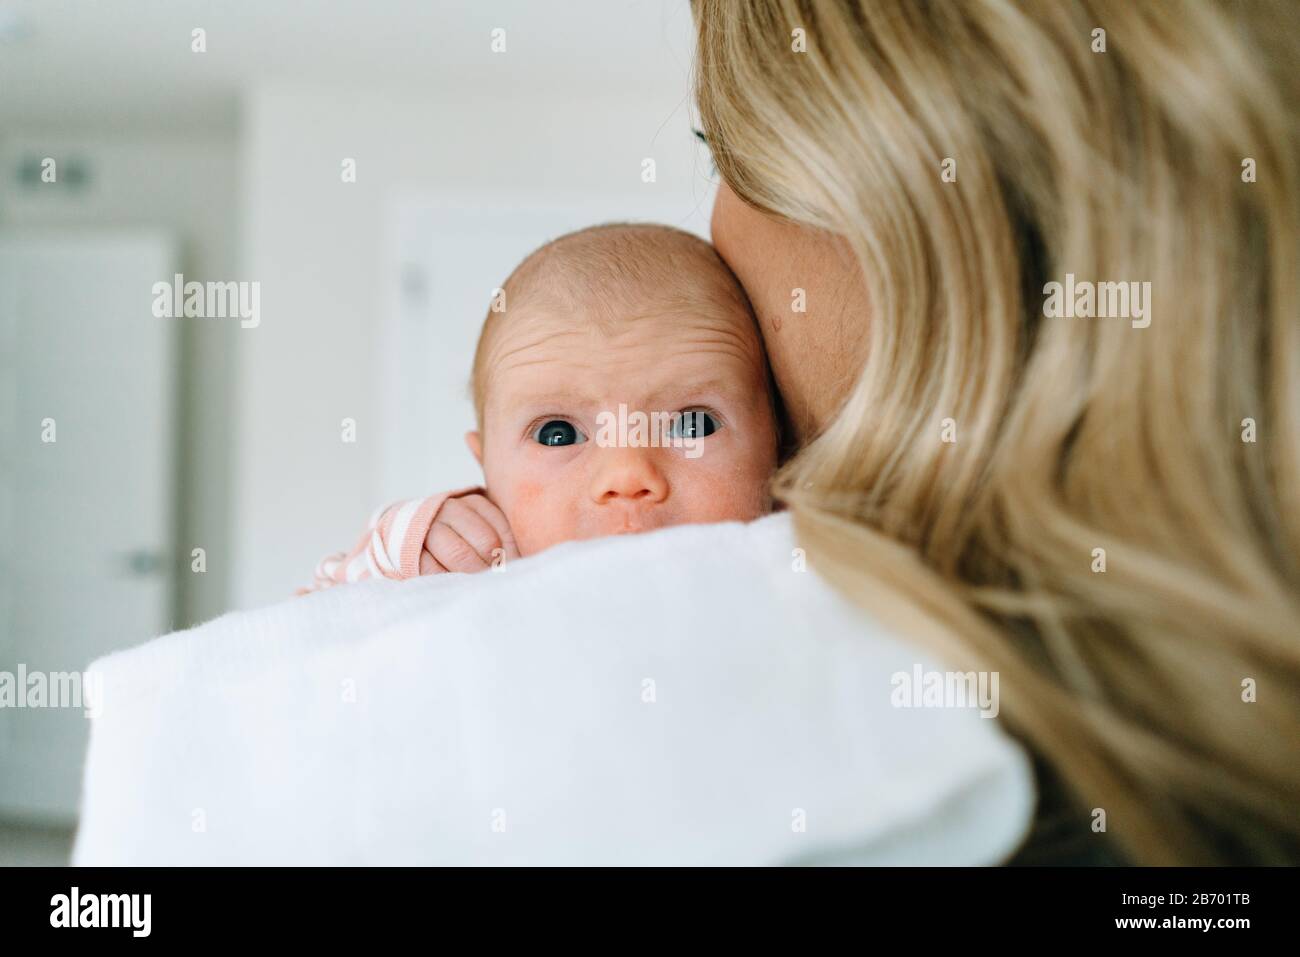 Over the shoulder view of a newborn baby girl being held by her mom Stock Photo